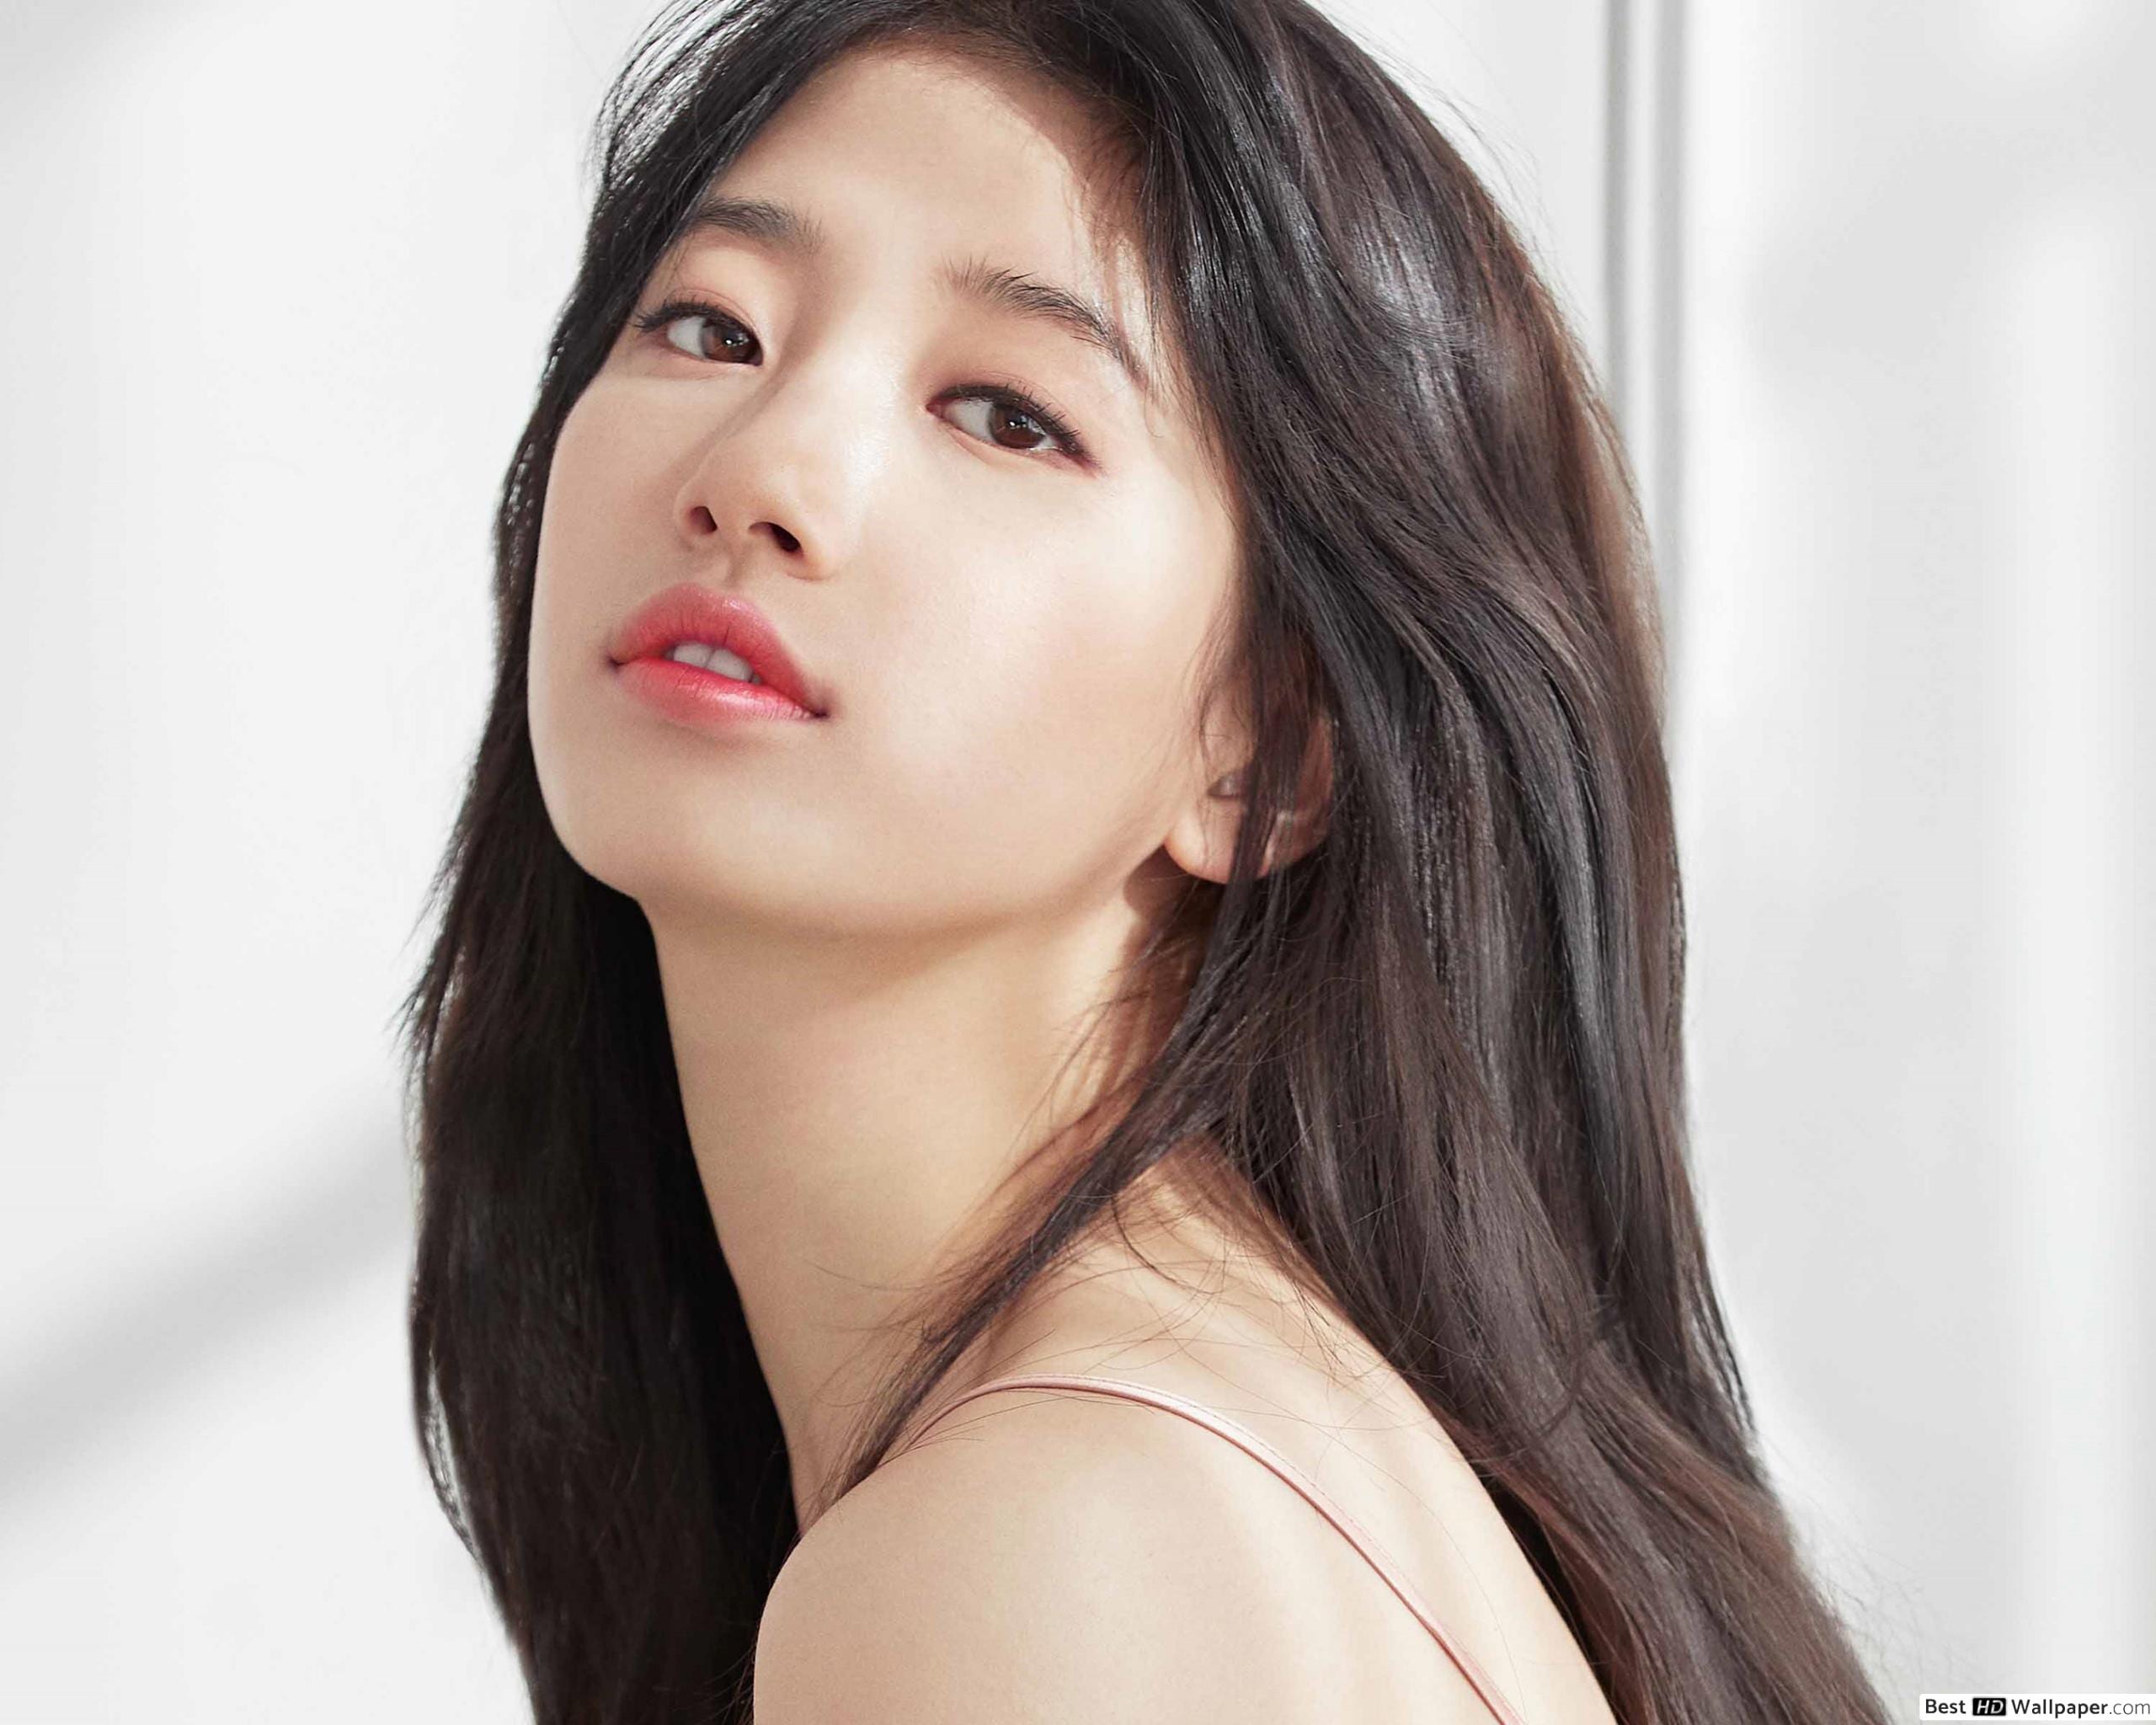 Bae Suzy In Talks To Star In The Upcoming Series “Second Anna”